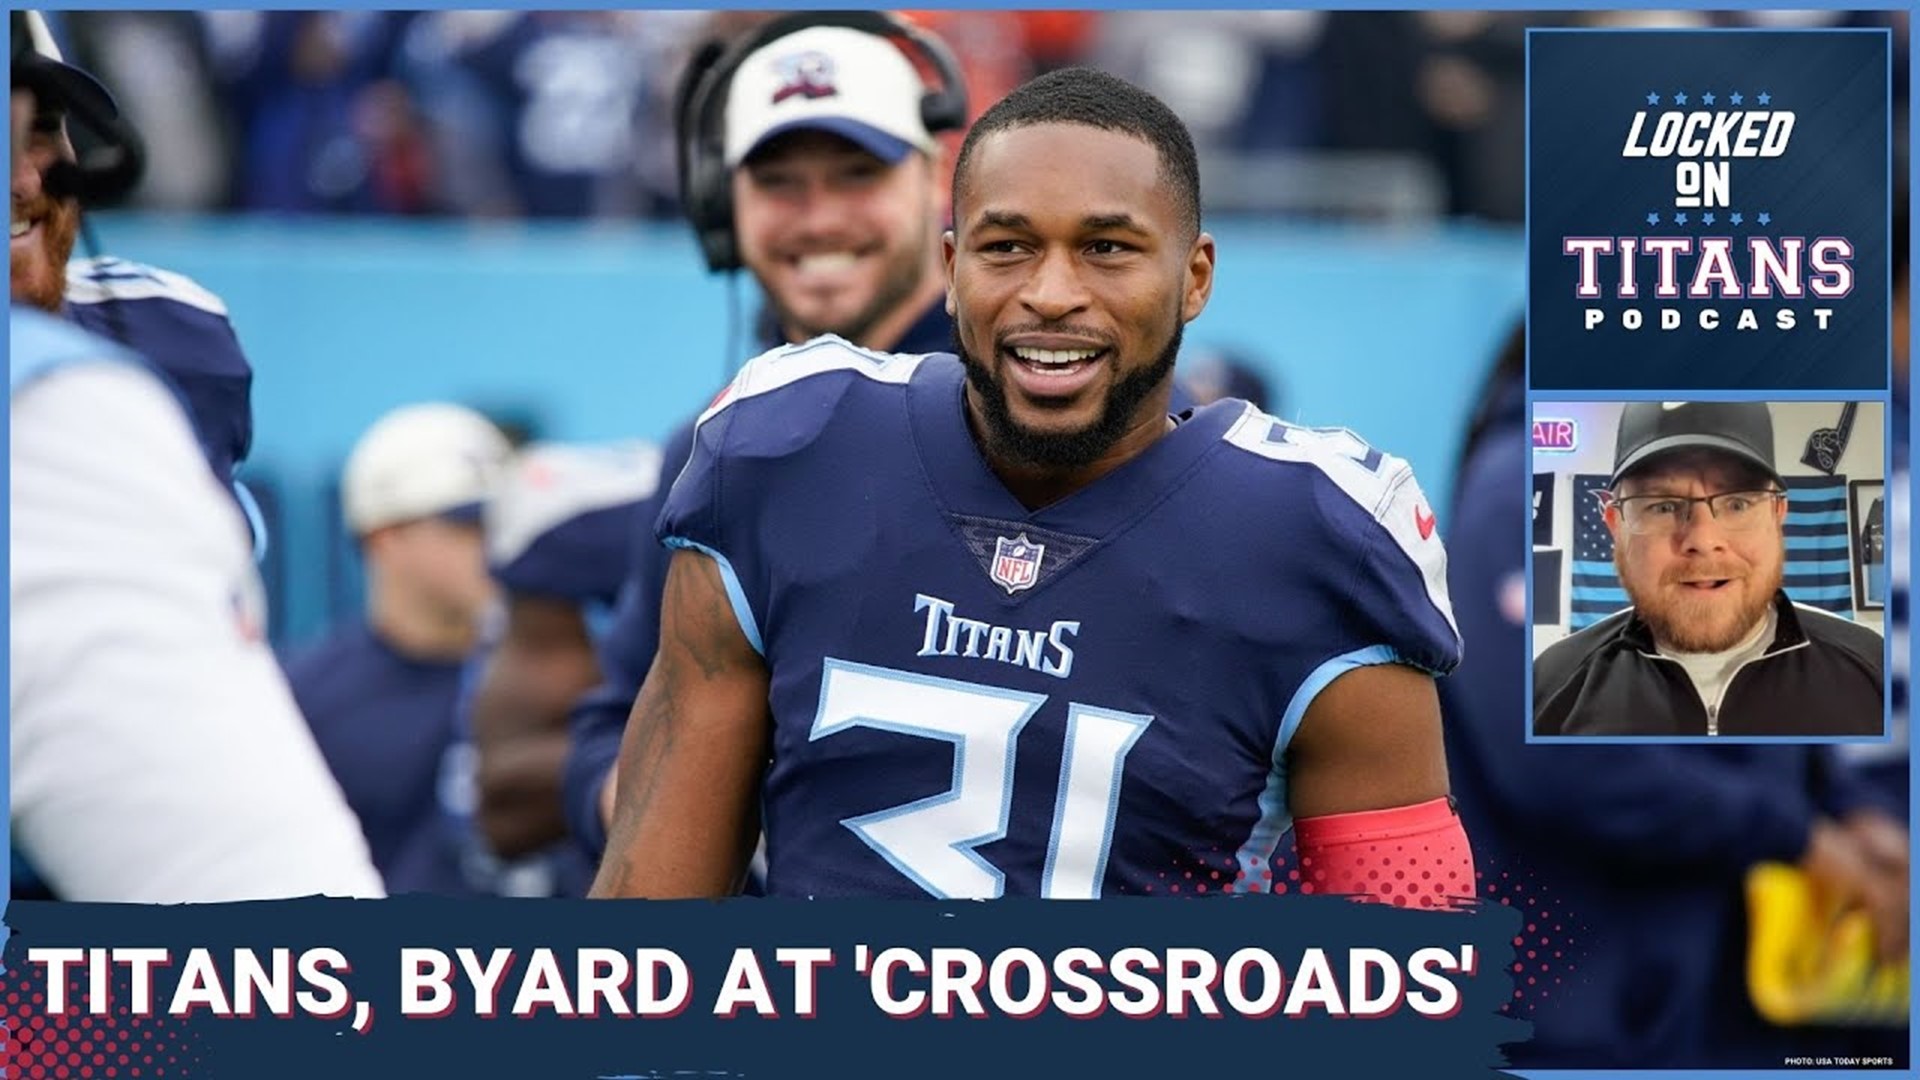 The Tennessee Titans continued a wild offseason when rumors came out that Kevin Byard demanded his release from the team.